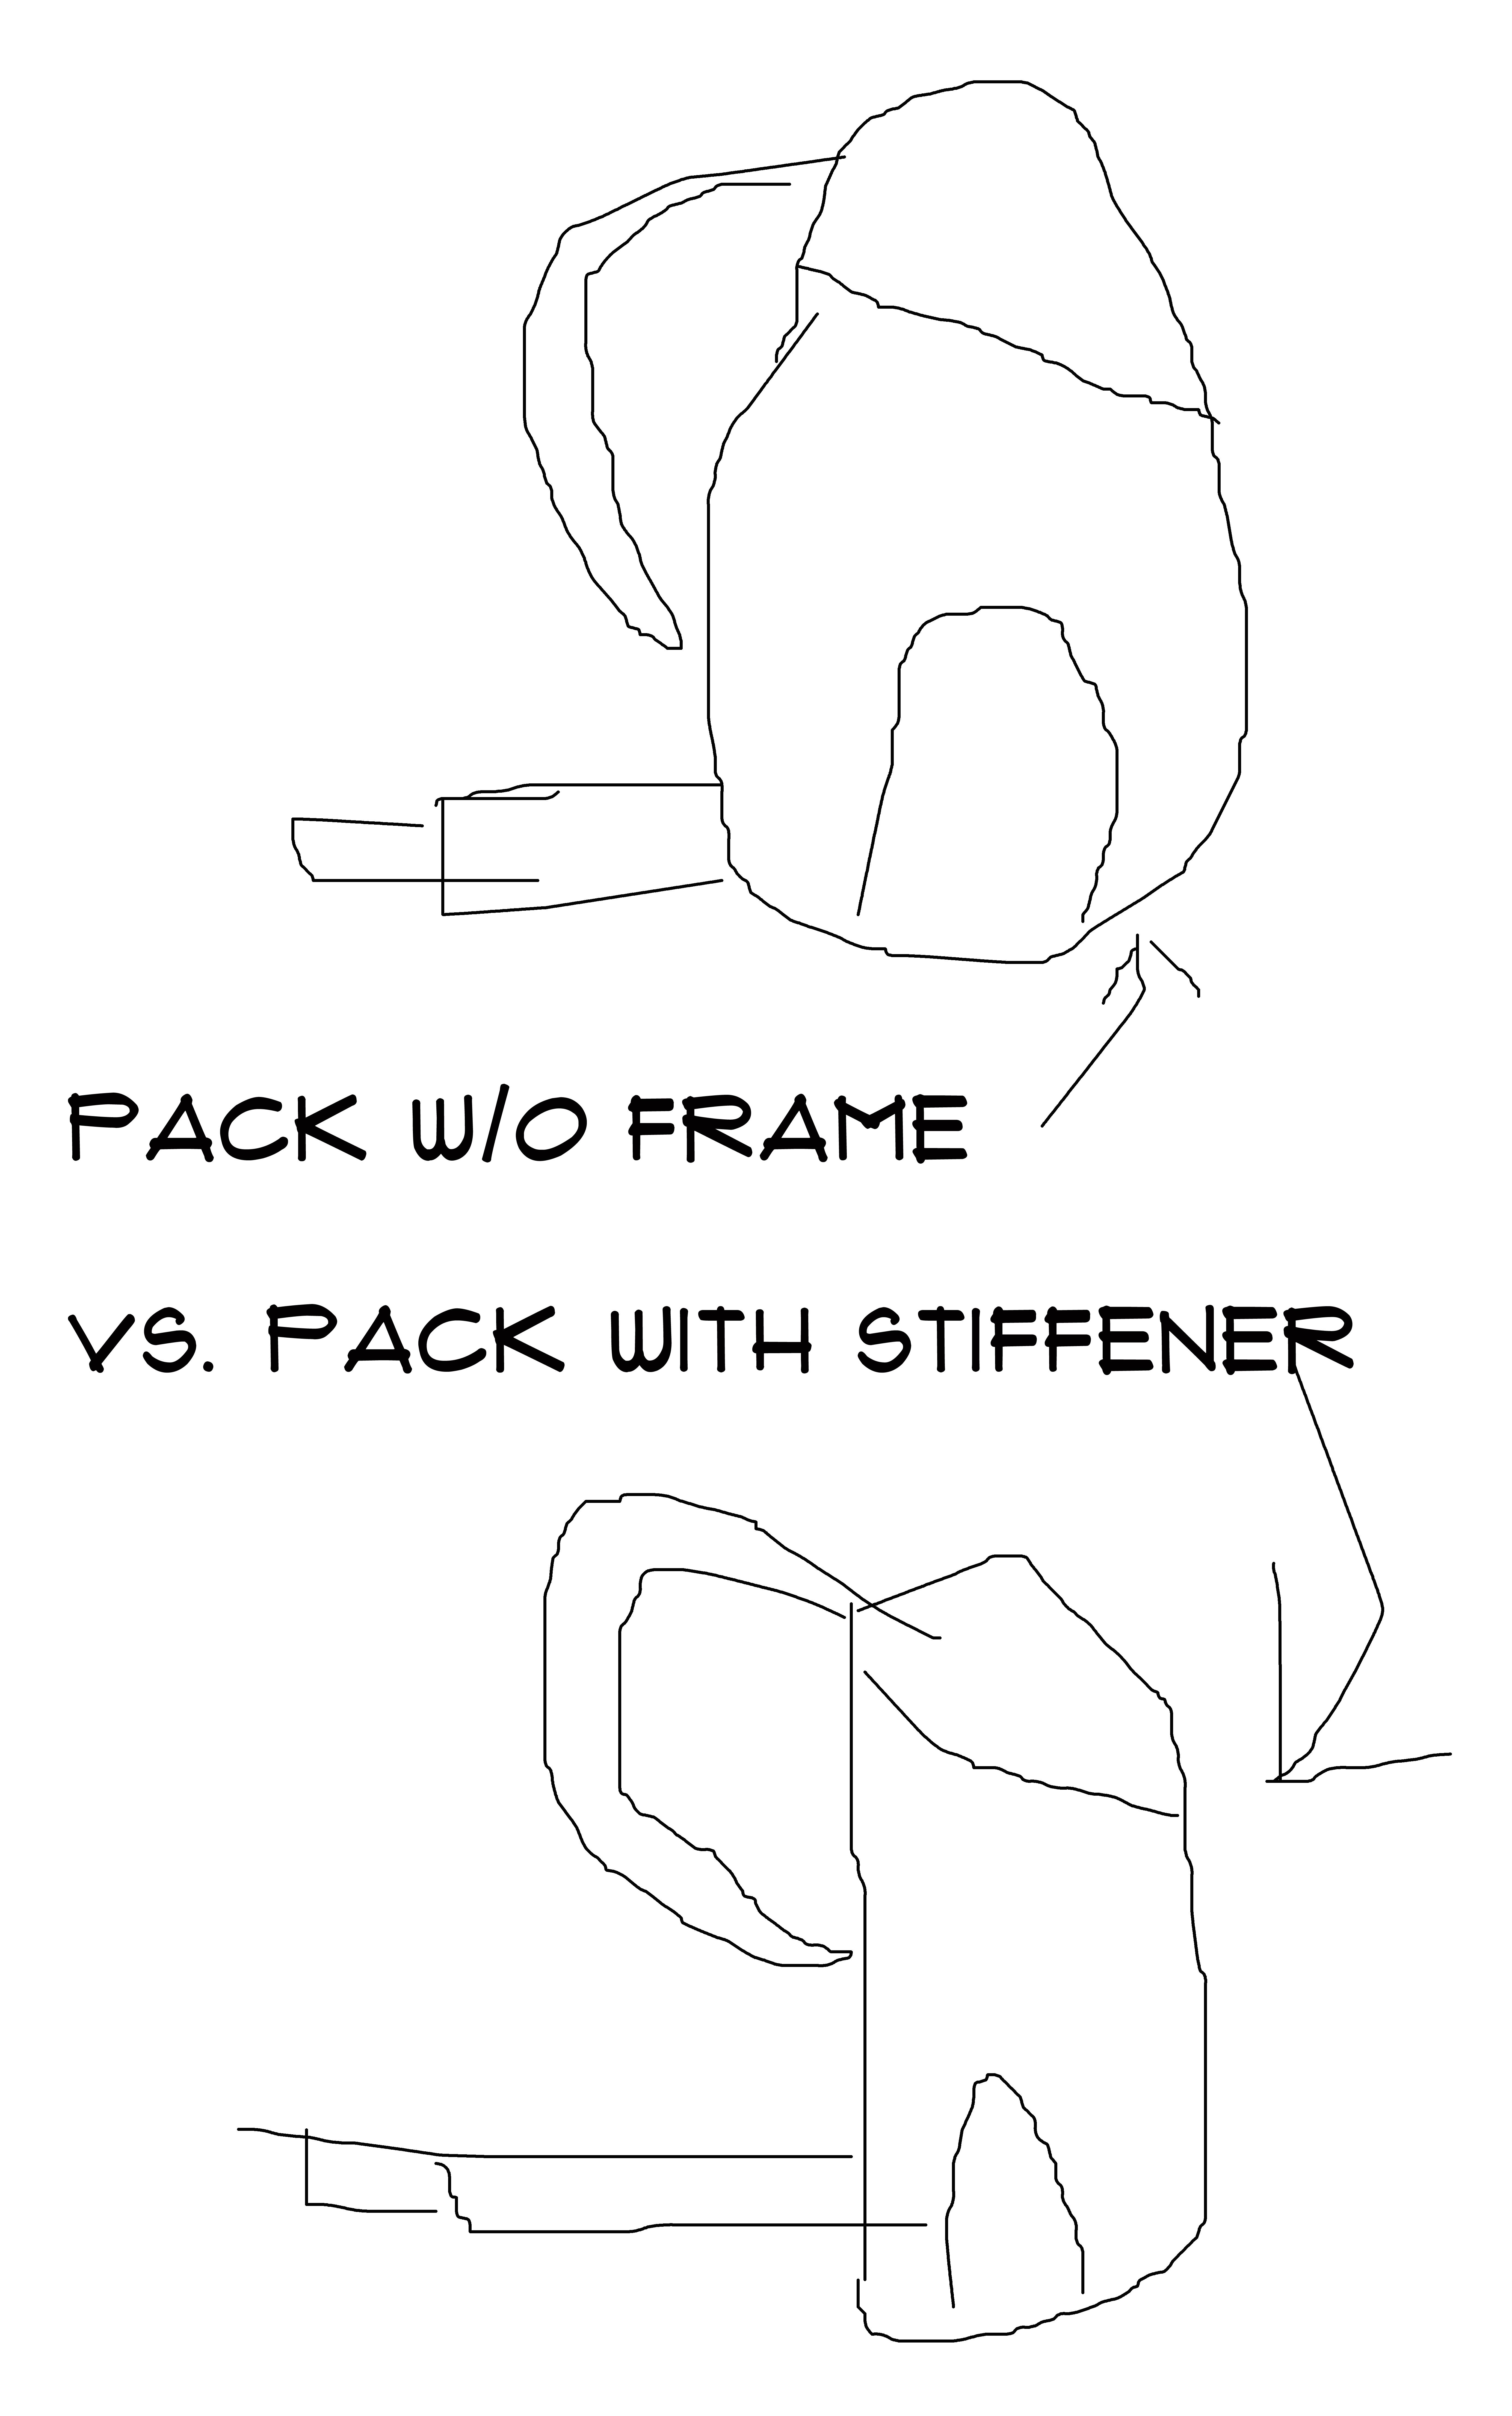 WITH AND W/O STIFFENER OR FRAME